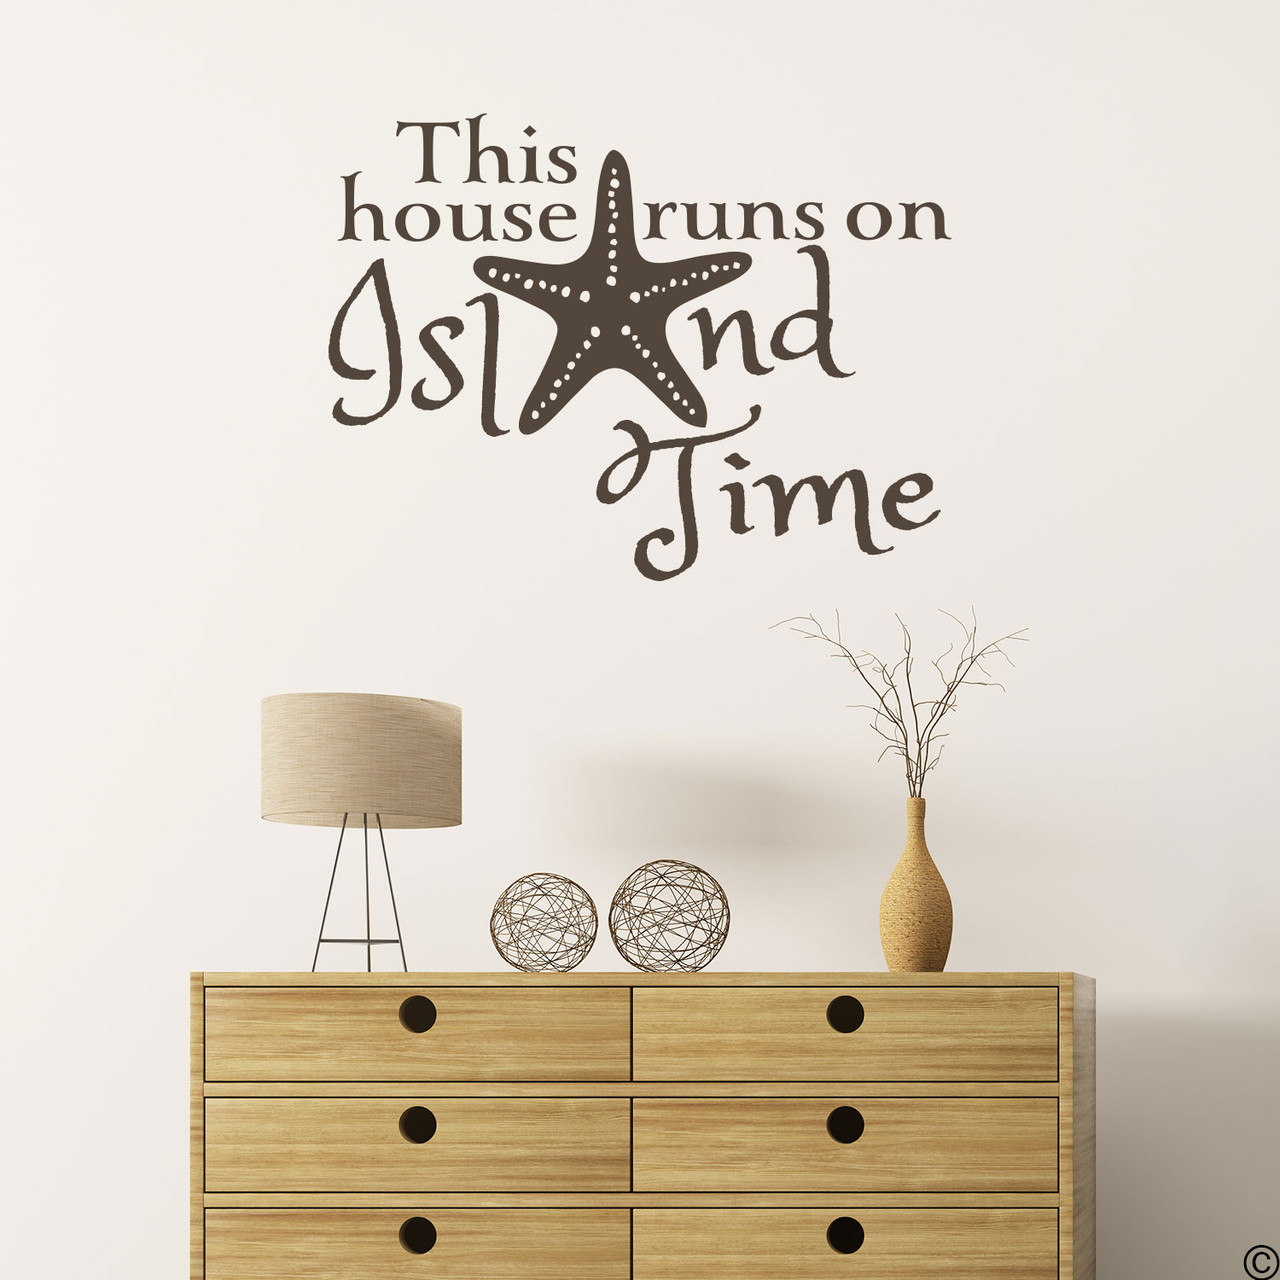 Starfish wall decal with "This house runs on Island Time," quote. Shown here in brown color.